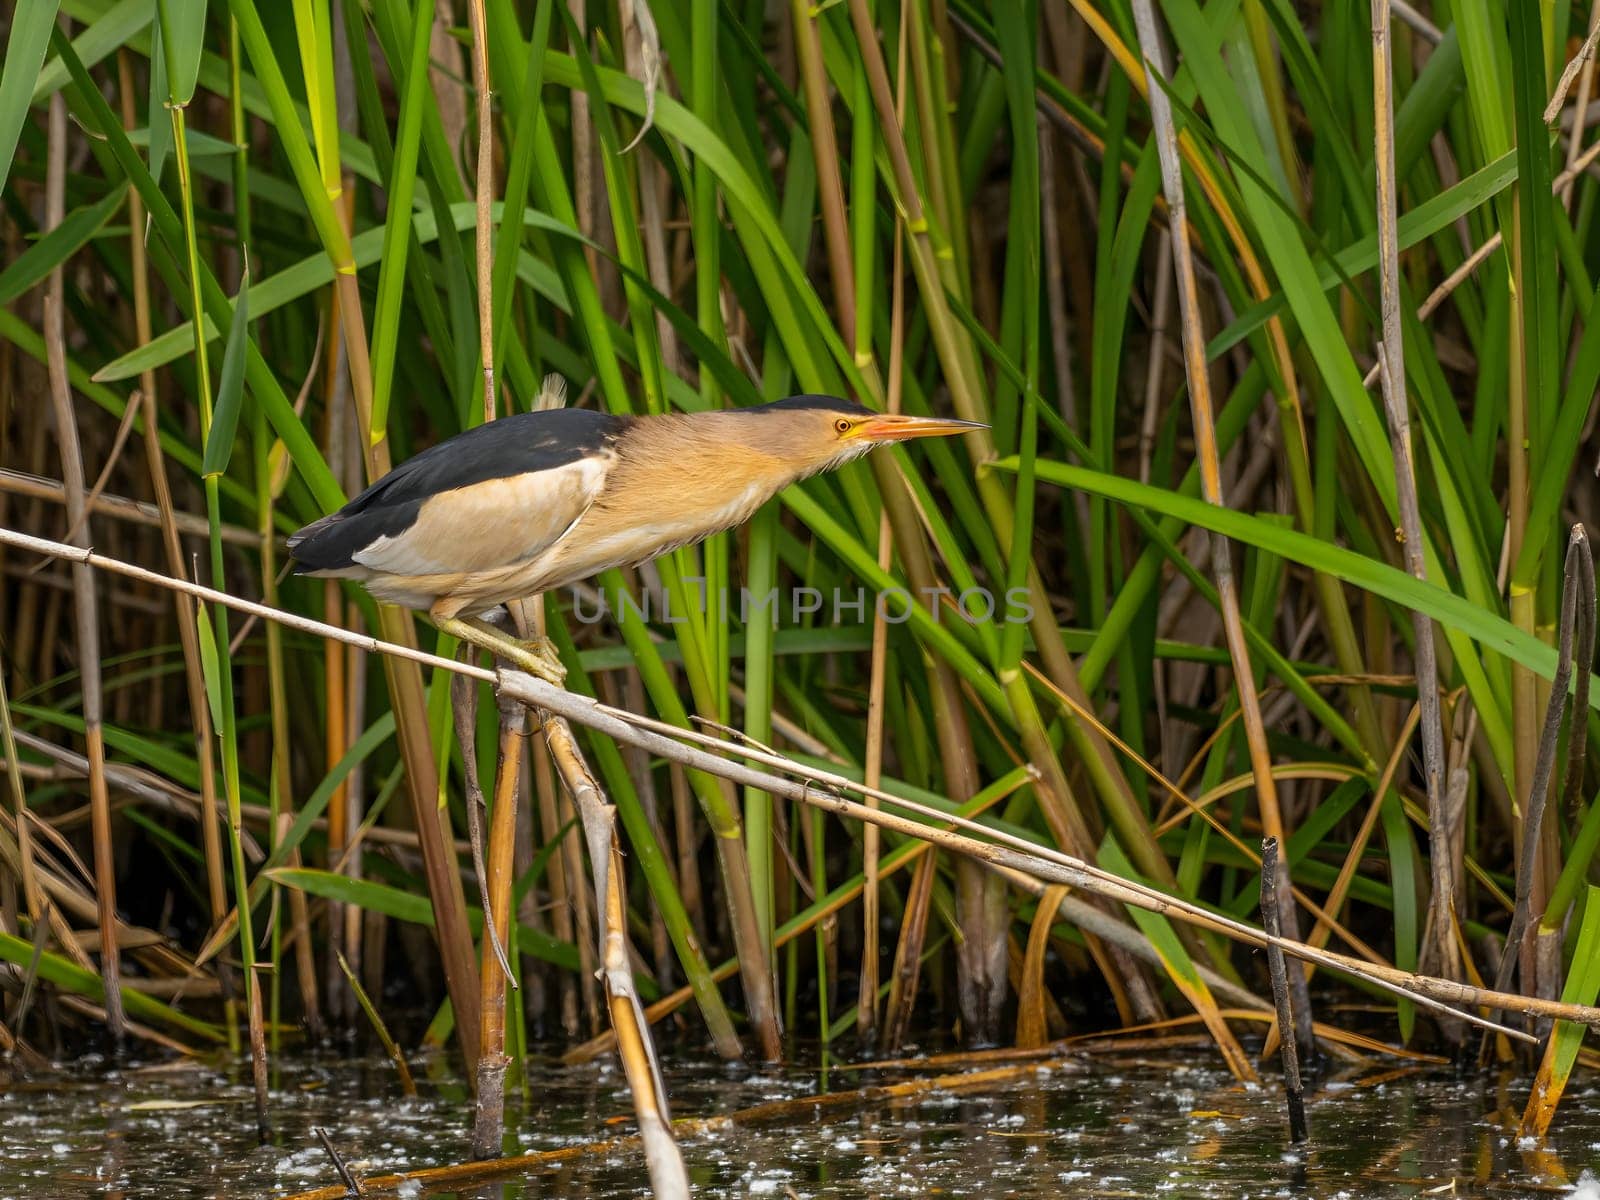 Little bittern sitting on a chin by the water against a background of greenery. by NatureTron